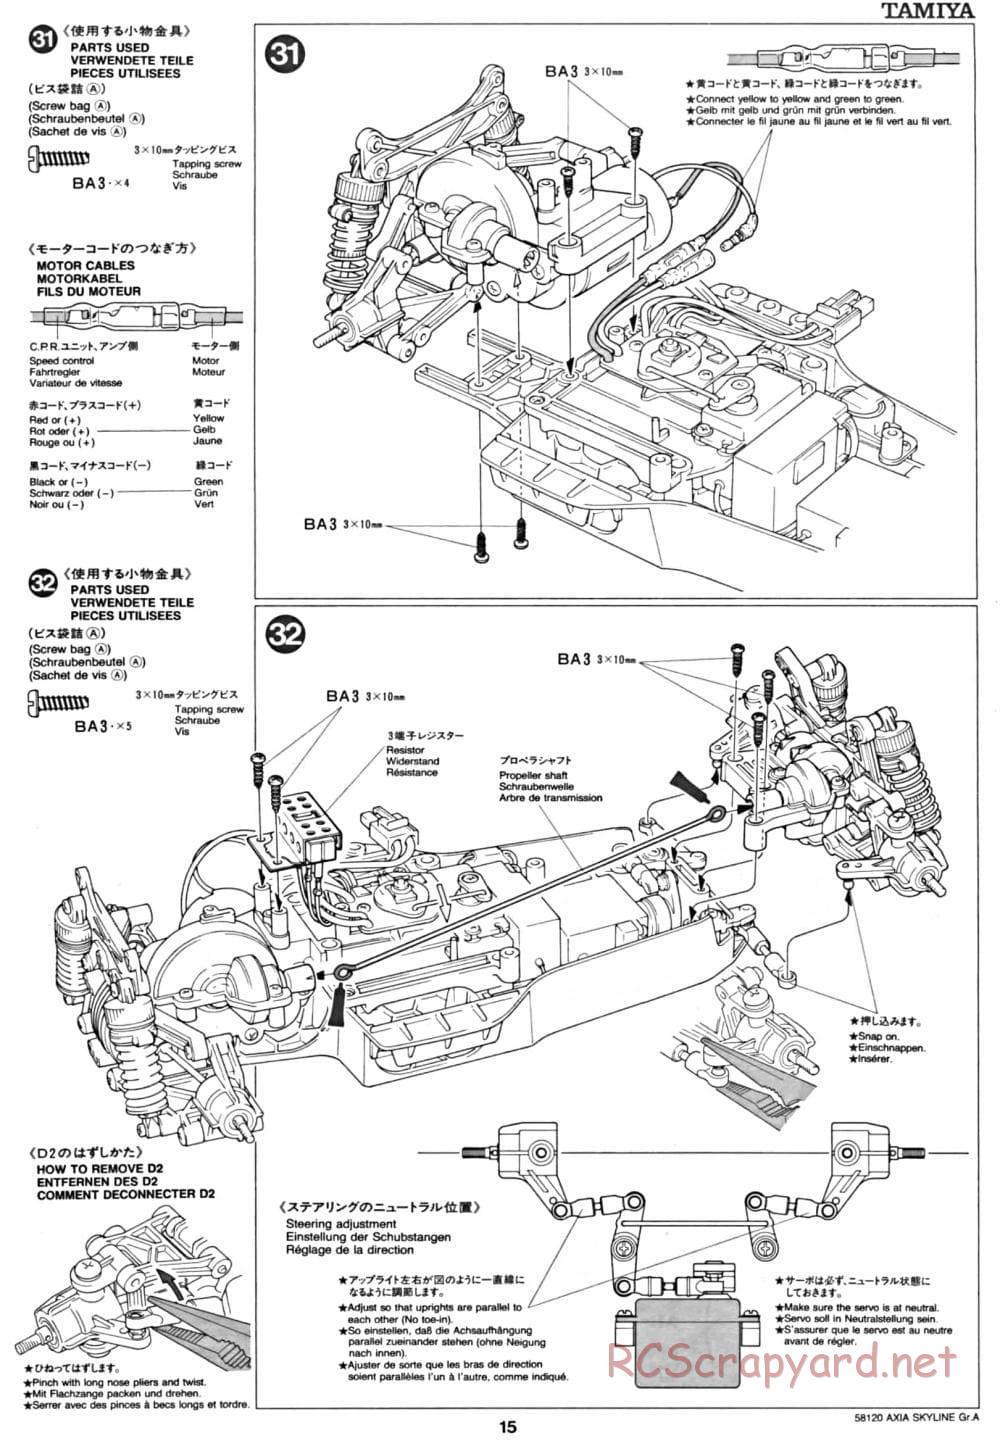 Tamiya - Axia Skyline GT-R Gr.A - TA-01 Chassis - Manual - Page 15